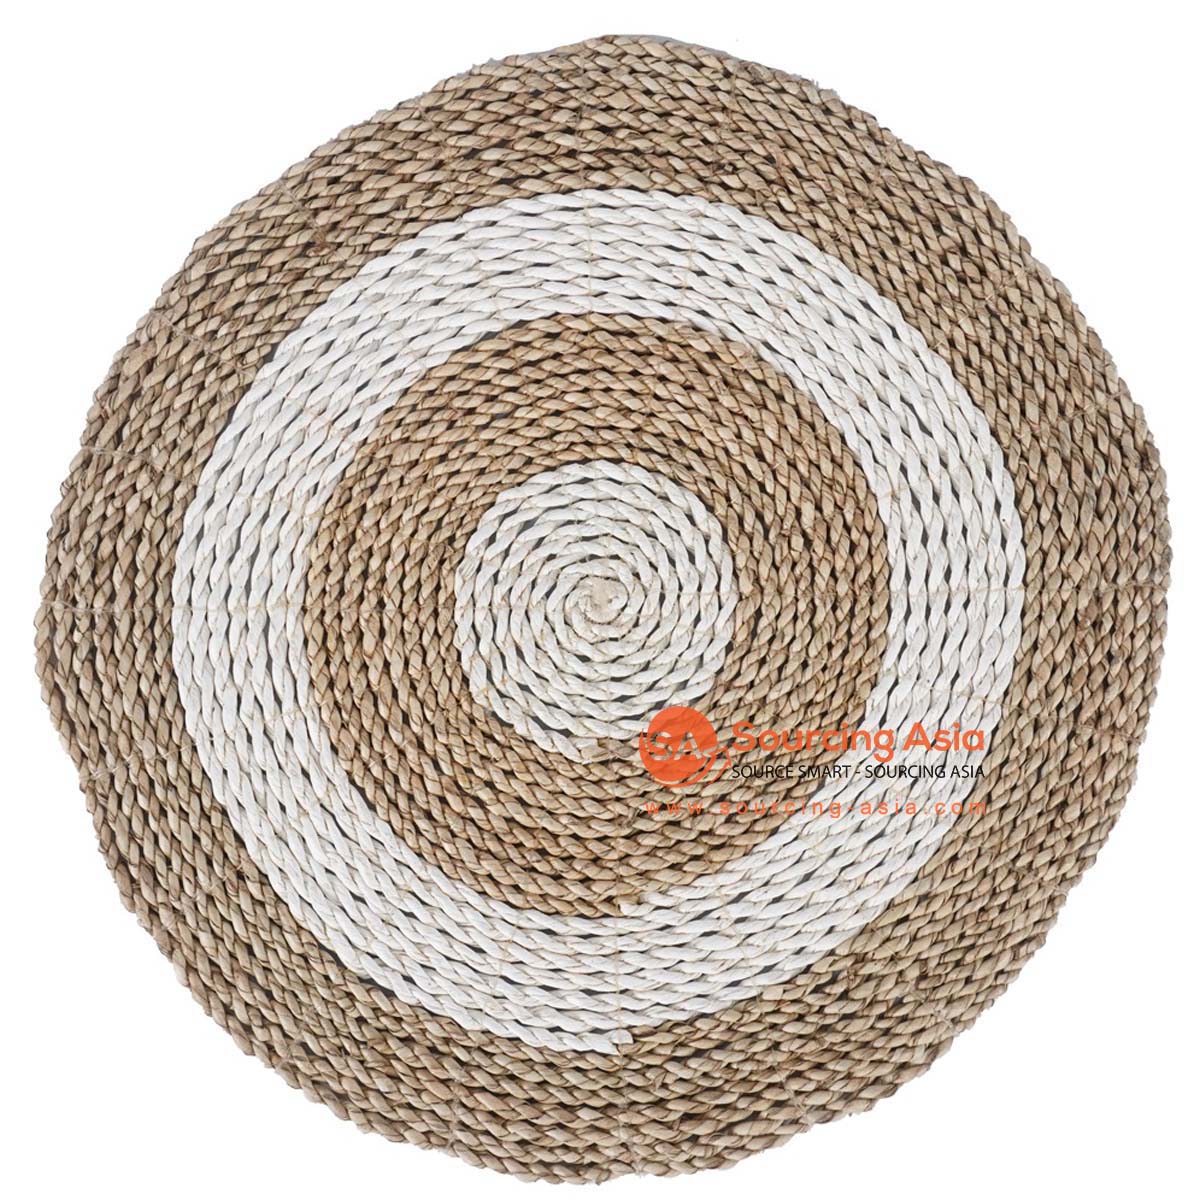 HBSC575 NATURAL AND WHITE PANDANUS ROUND PLACEMAT